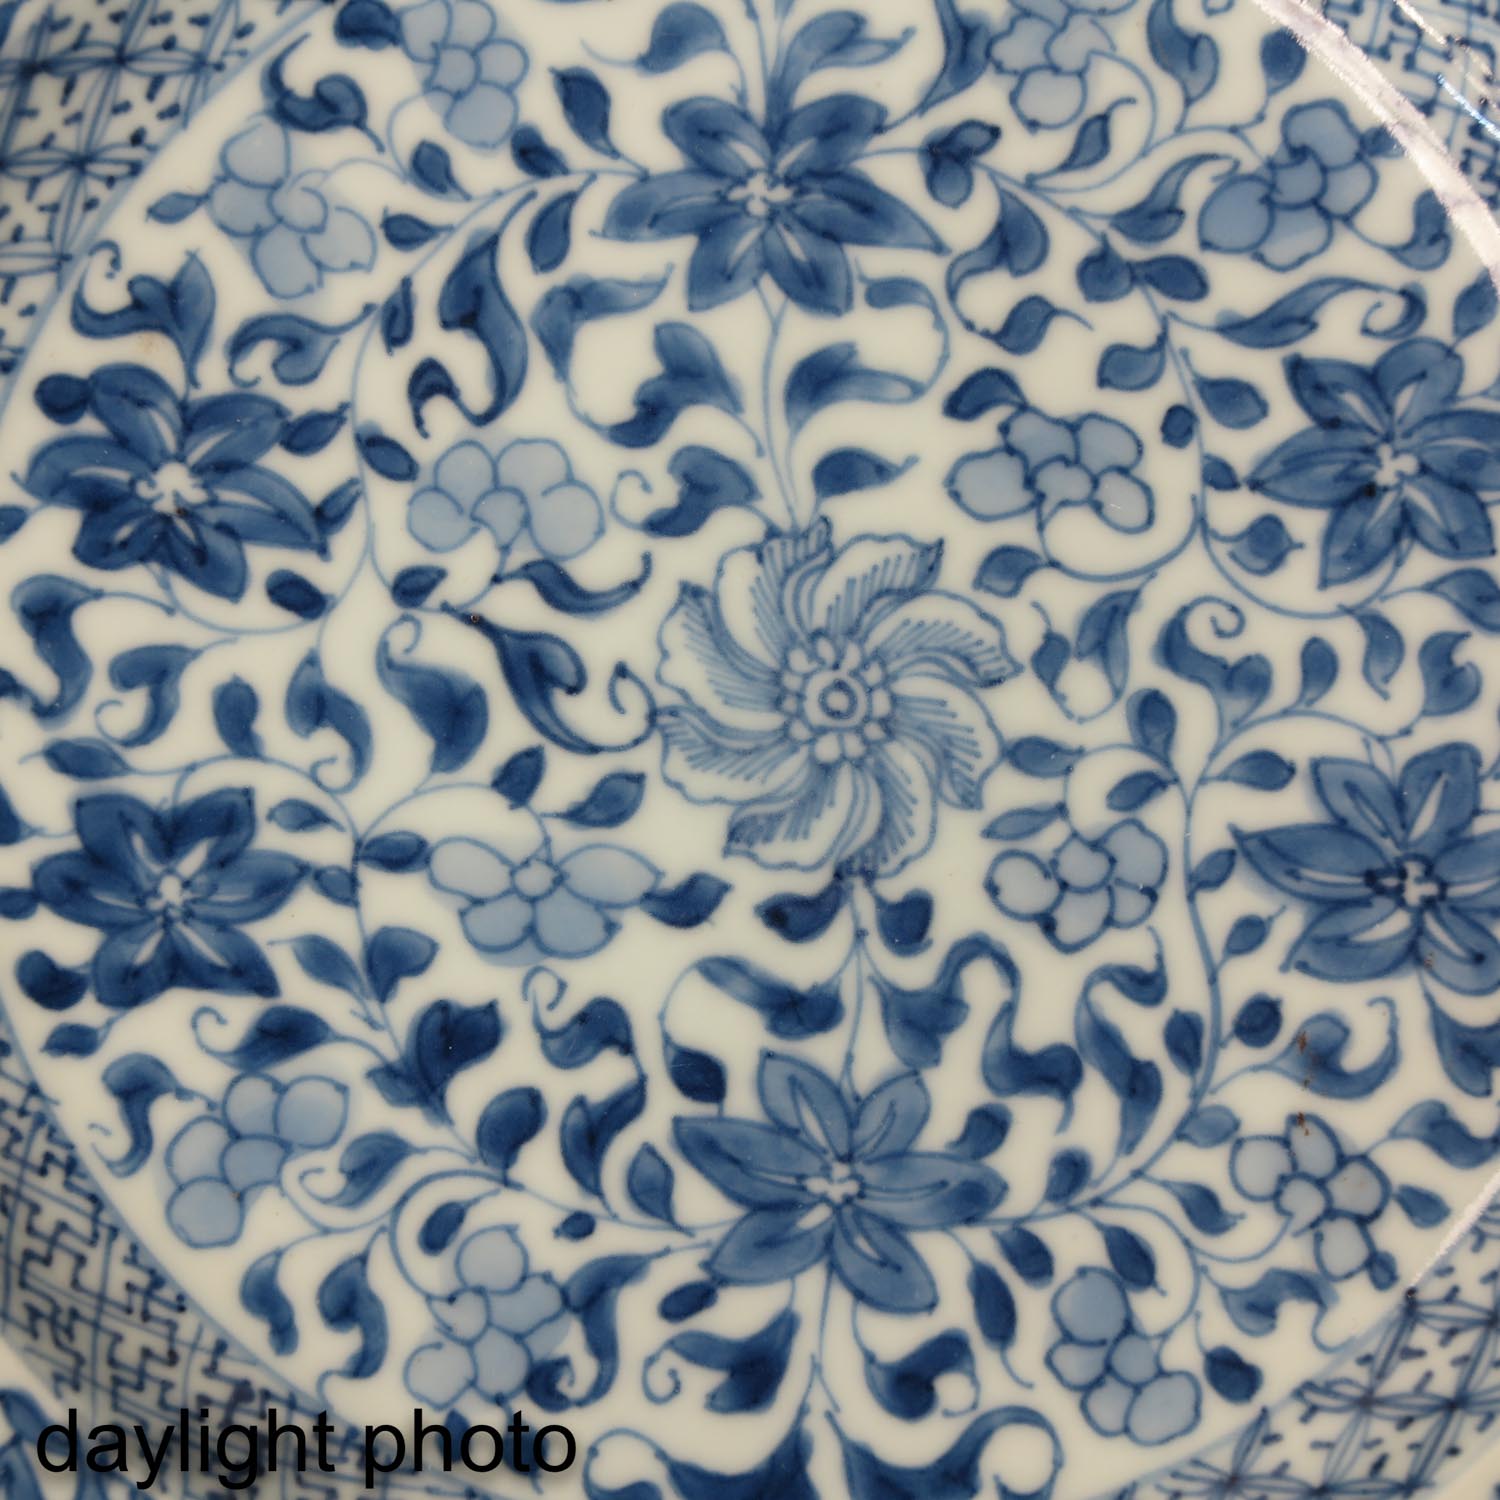 A Series of 5 Blue and White Plates - Image 10 of 10